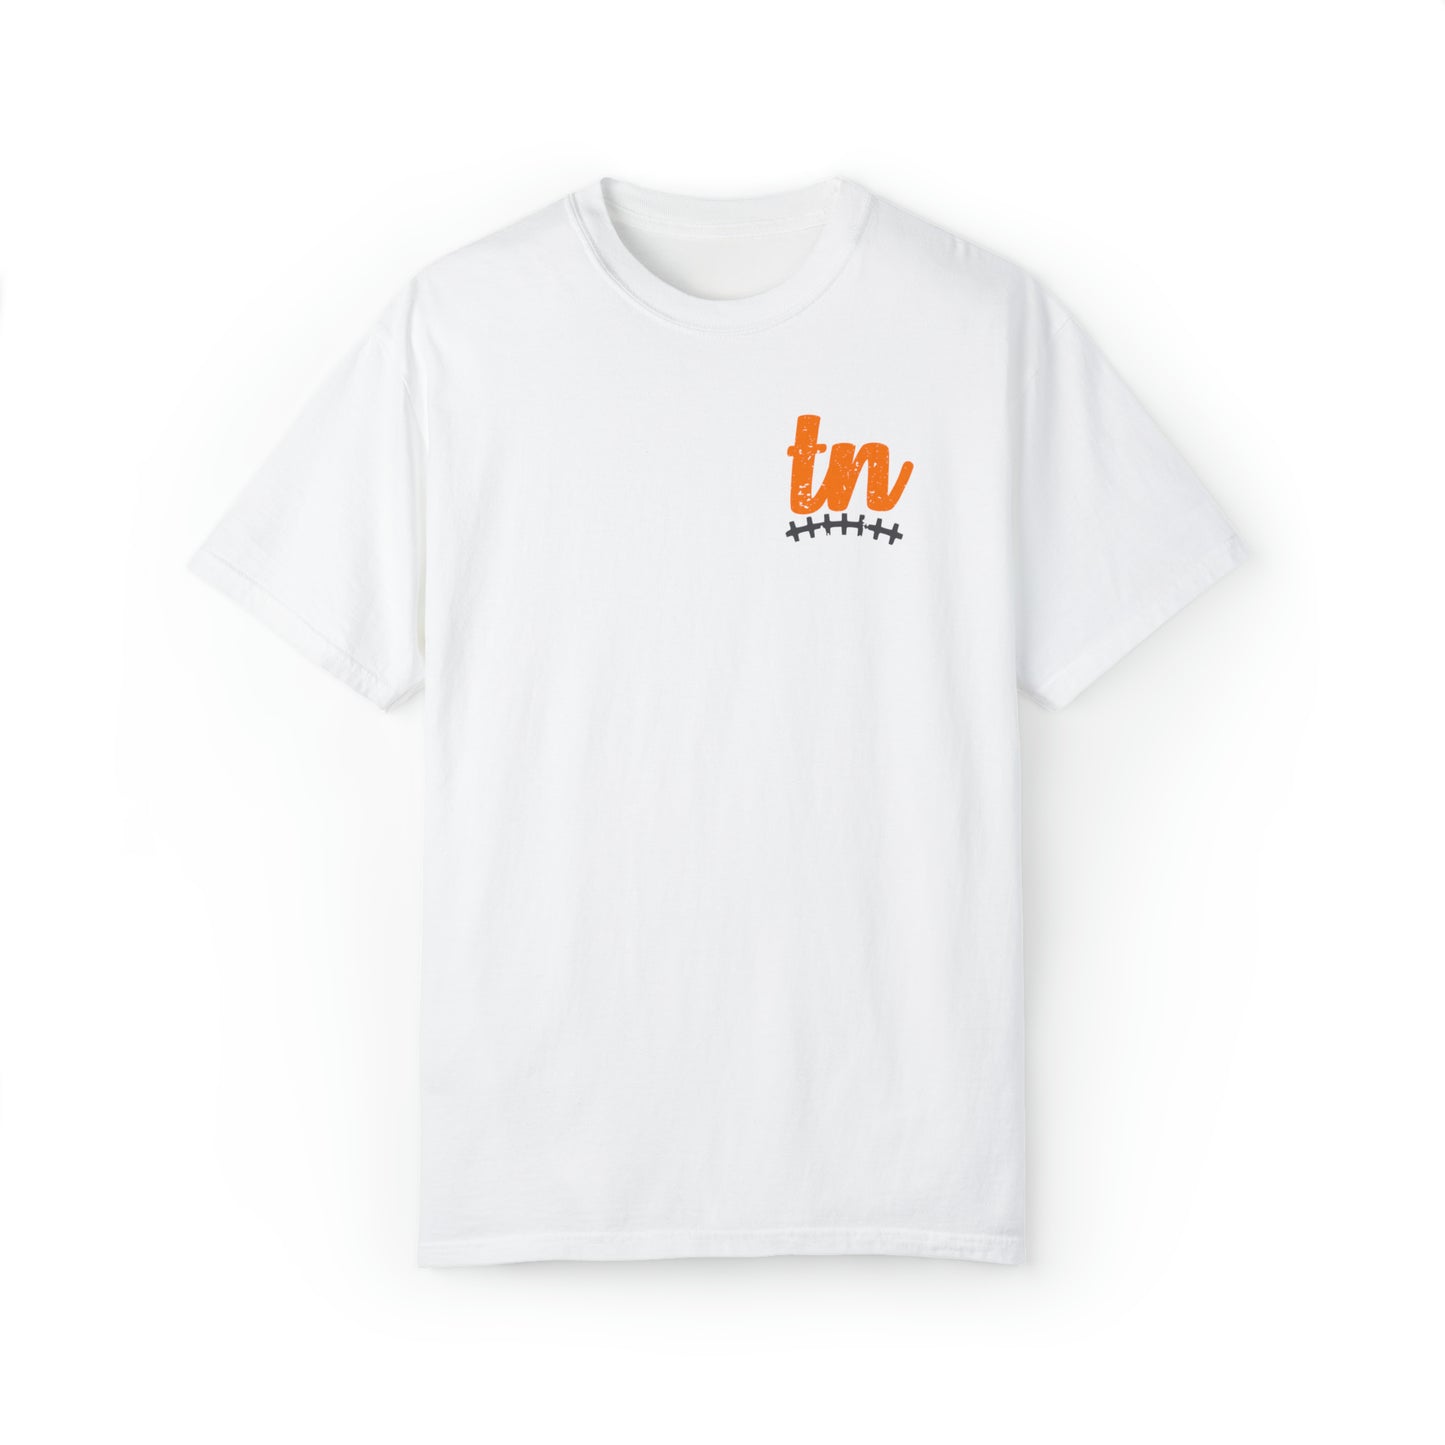 Tennessee Vols Game Day Shirt